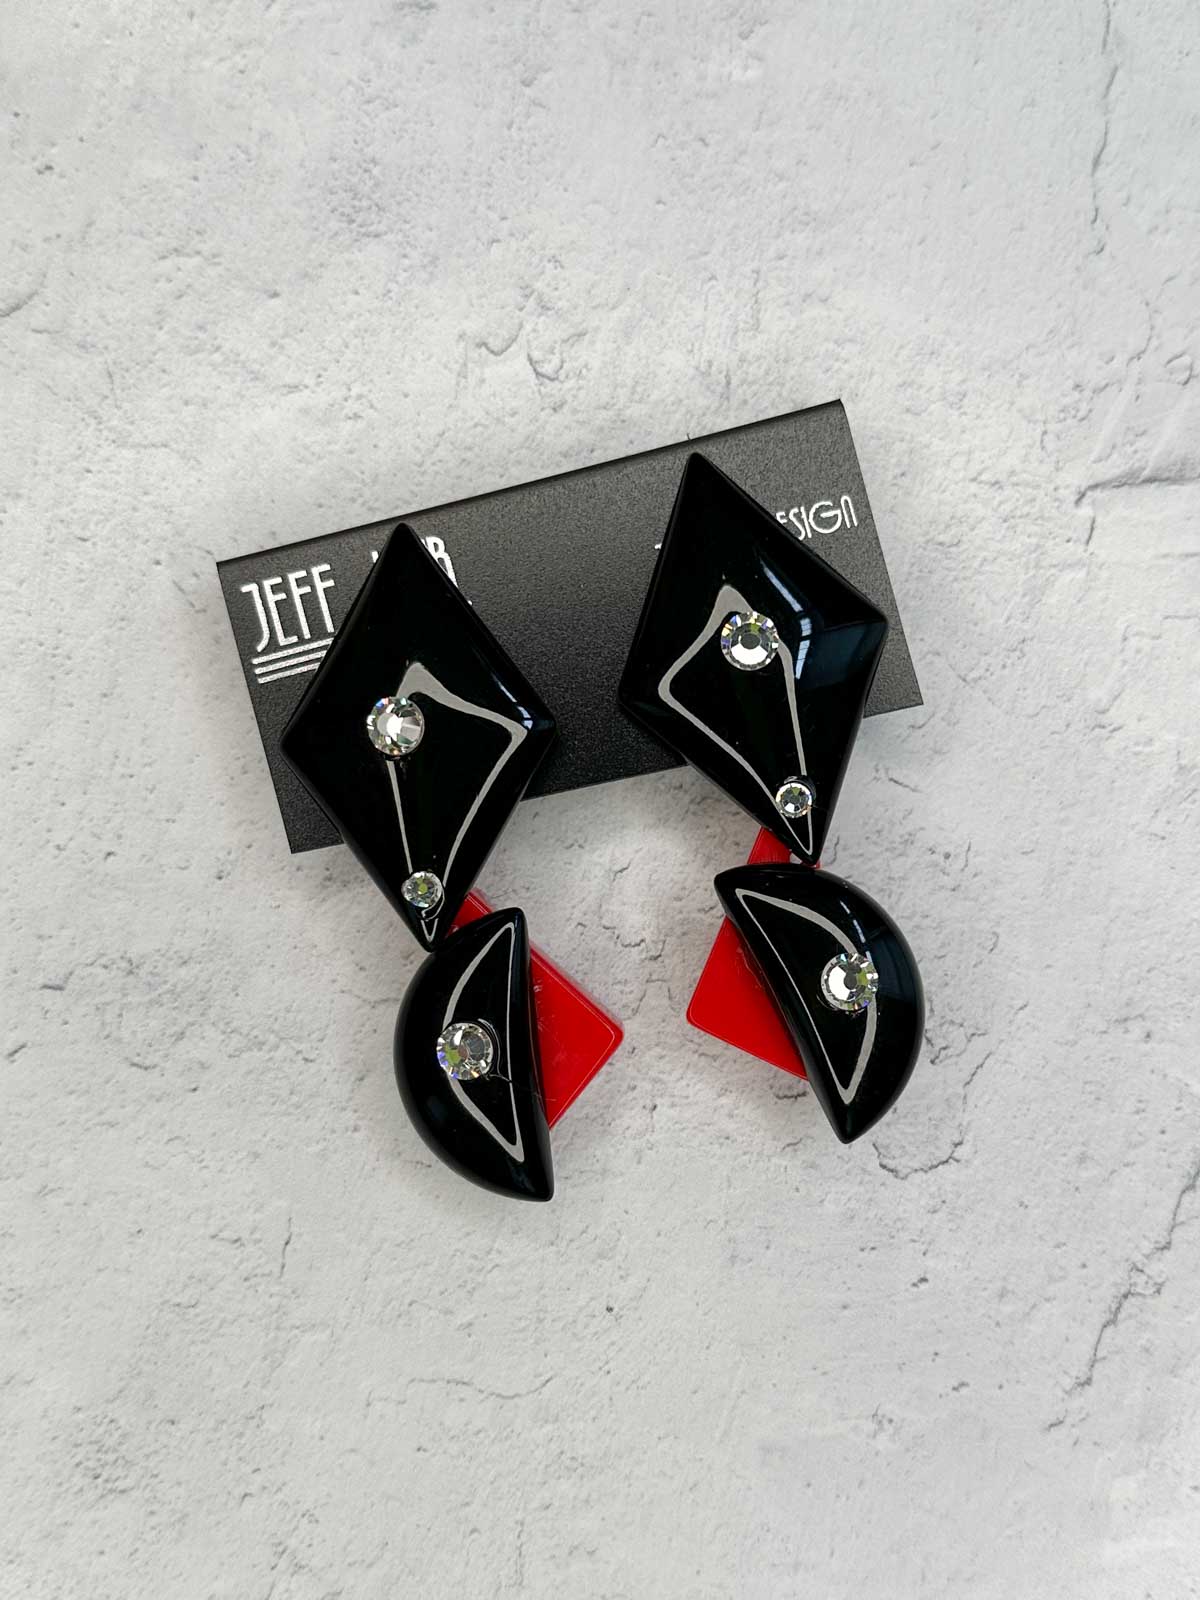 Jeff Lieb Total Design Jewelry Geometric Resin Post Drop Earrings, Black/Red - Statement Boutique